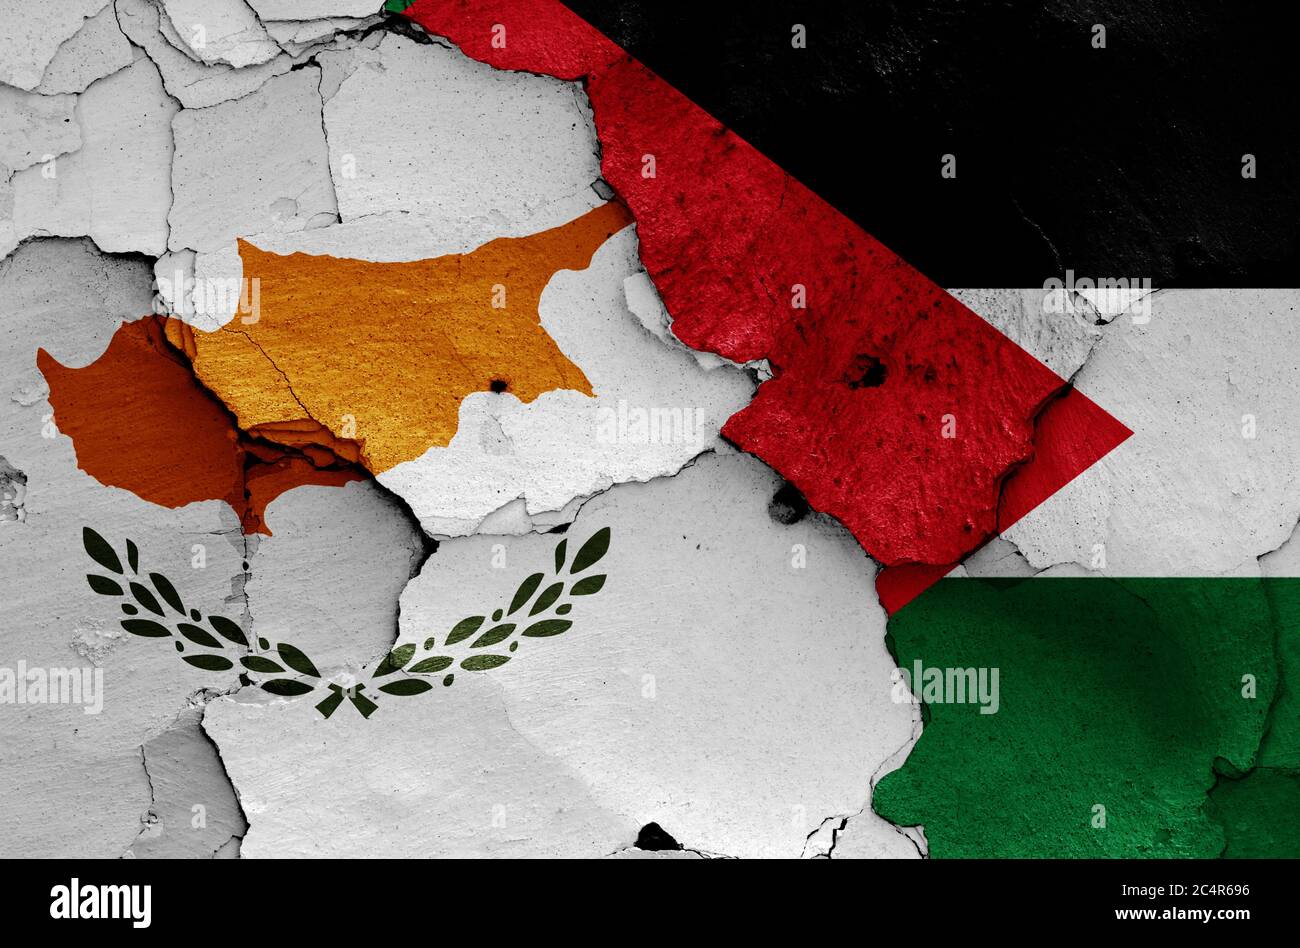 flags of Cyprus and Palestine painted on cracked wall Stock Photo